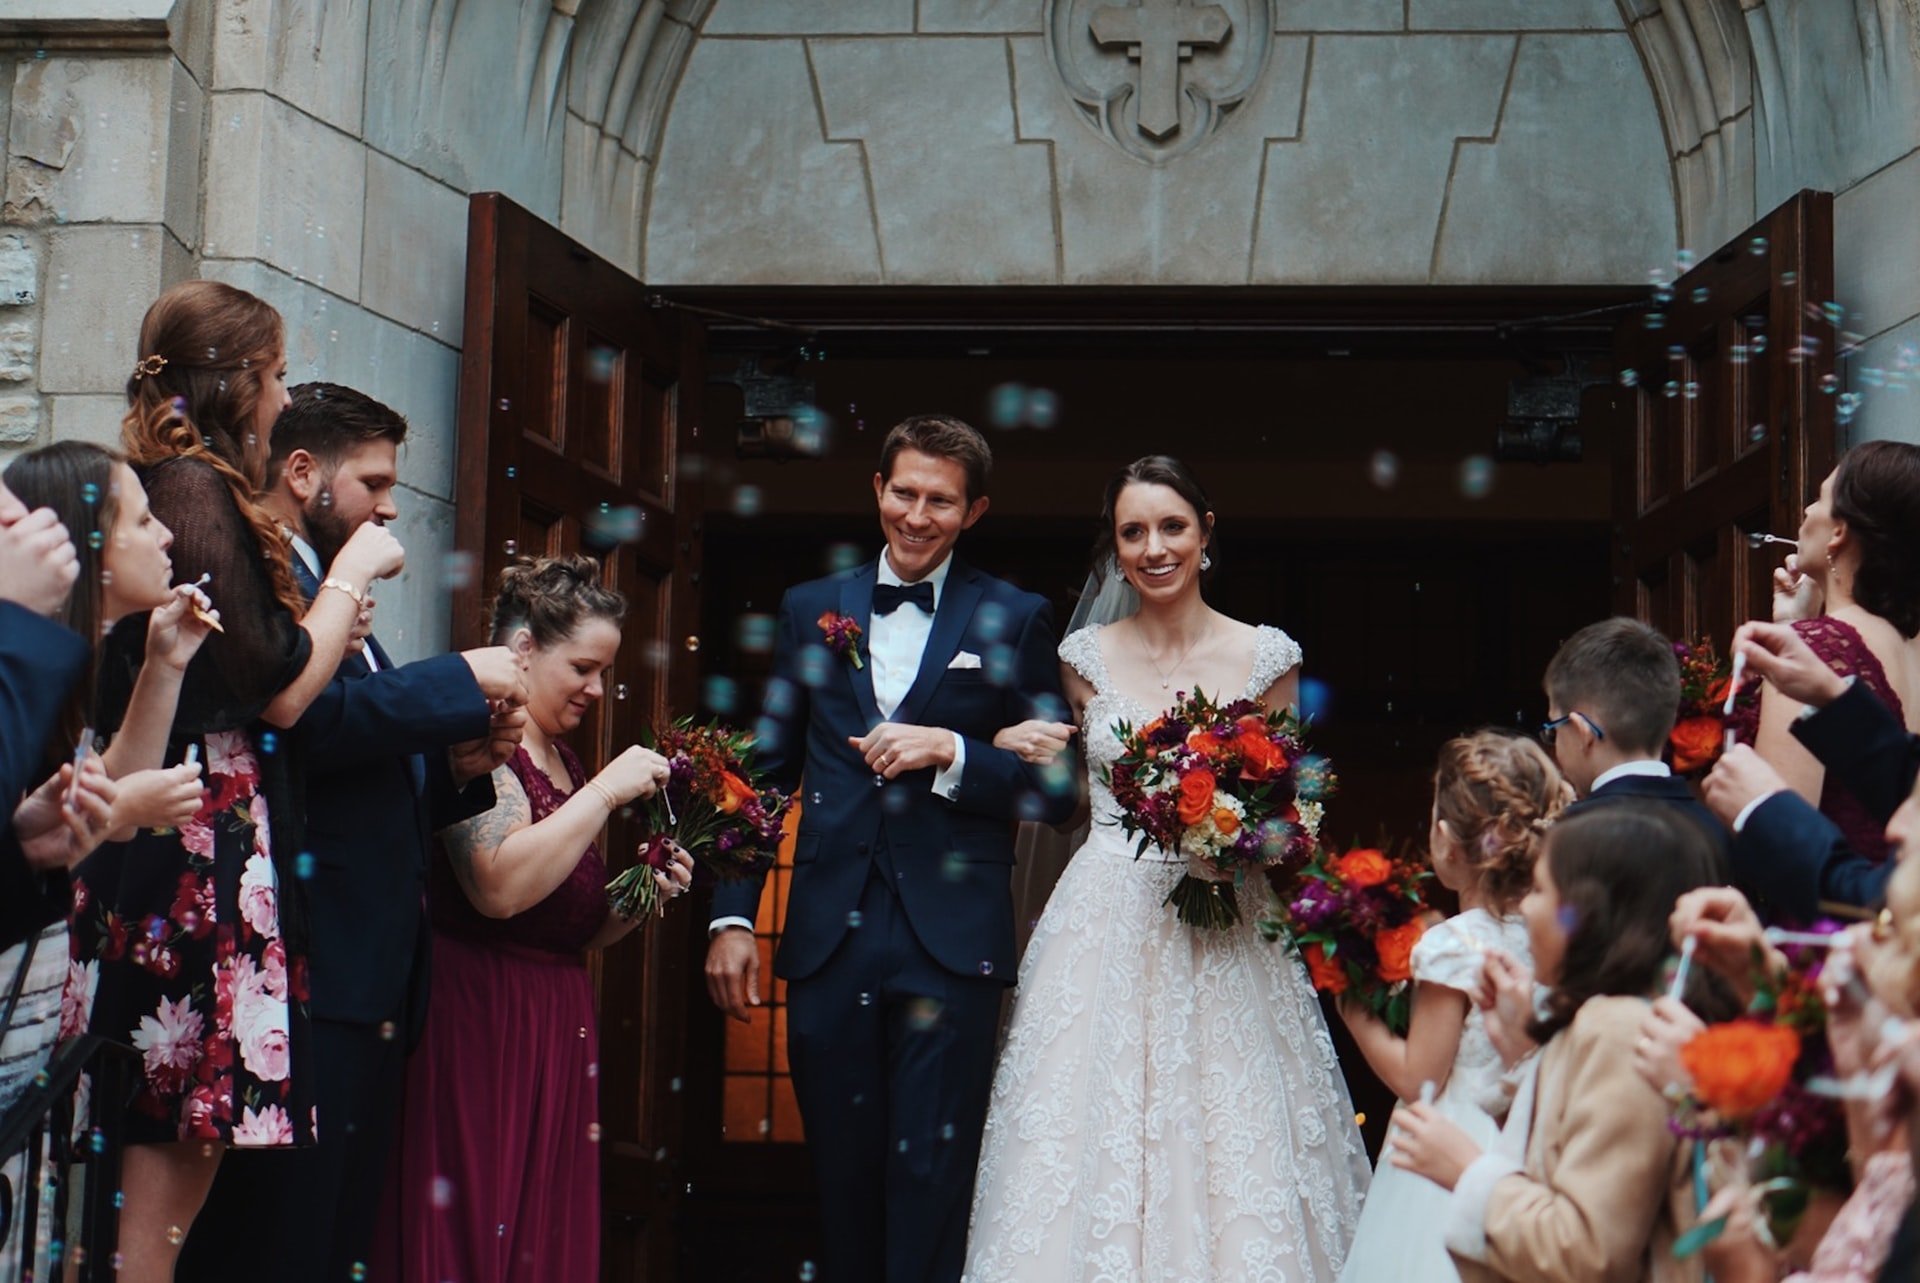 OP's mother-in-law didn't attend her wedding | Source: Unsplash